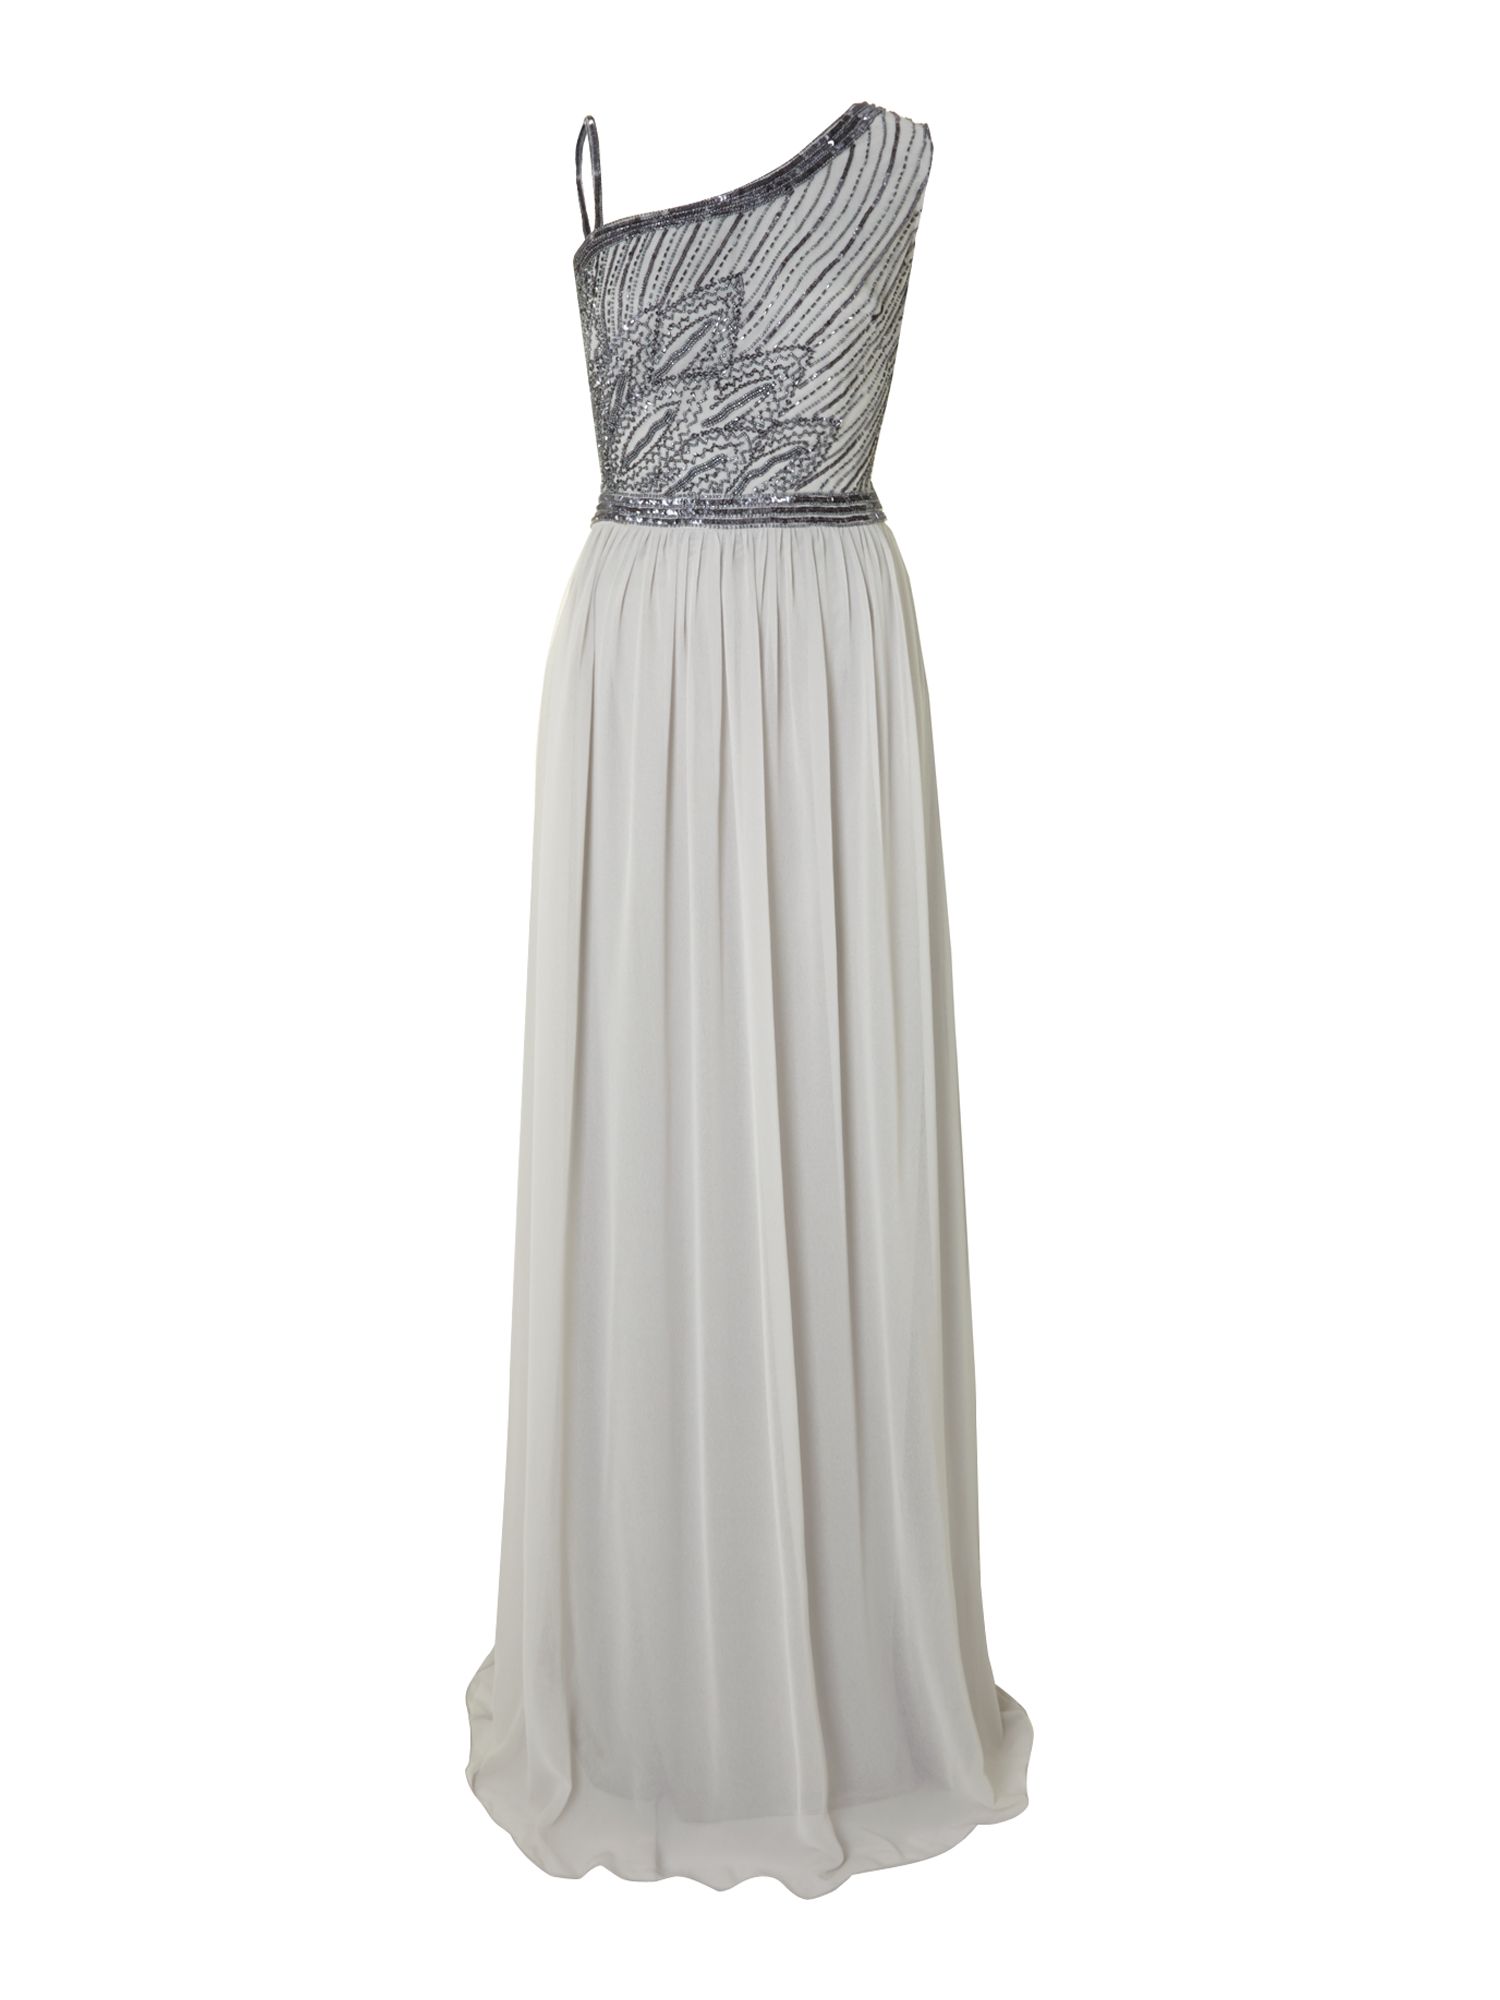 Js collections Leaf Beaded Chiffon Dress in Gray | Lyst